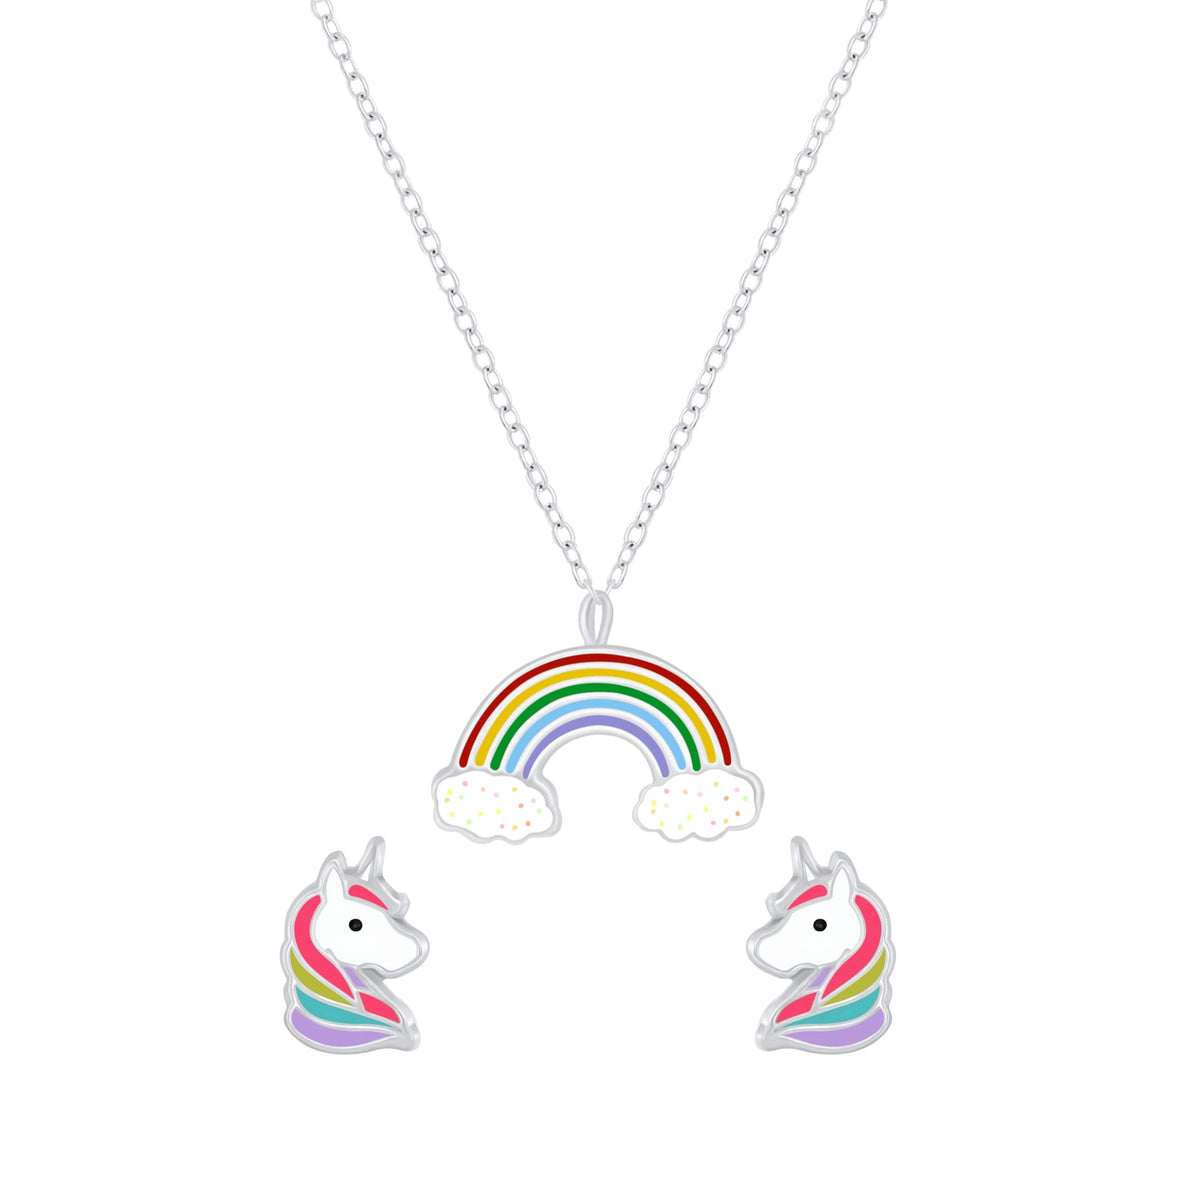 Raajsi by Yellow Chimes 925 Sterling Silver Pendant Set for Girls & Kids Melbees Kids Collection Rainbow Design | Birthday Gift for Girls Kids | With Certificate of Authenticity & 6 Month Warranty